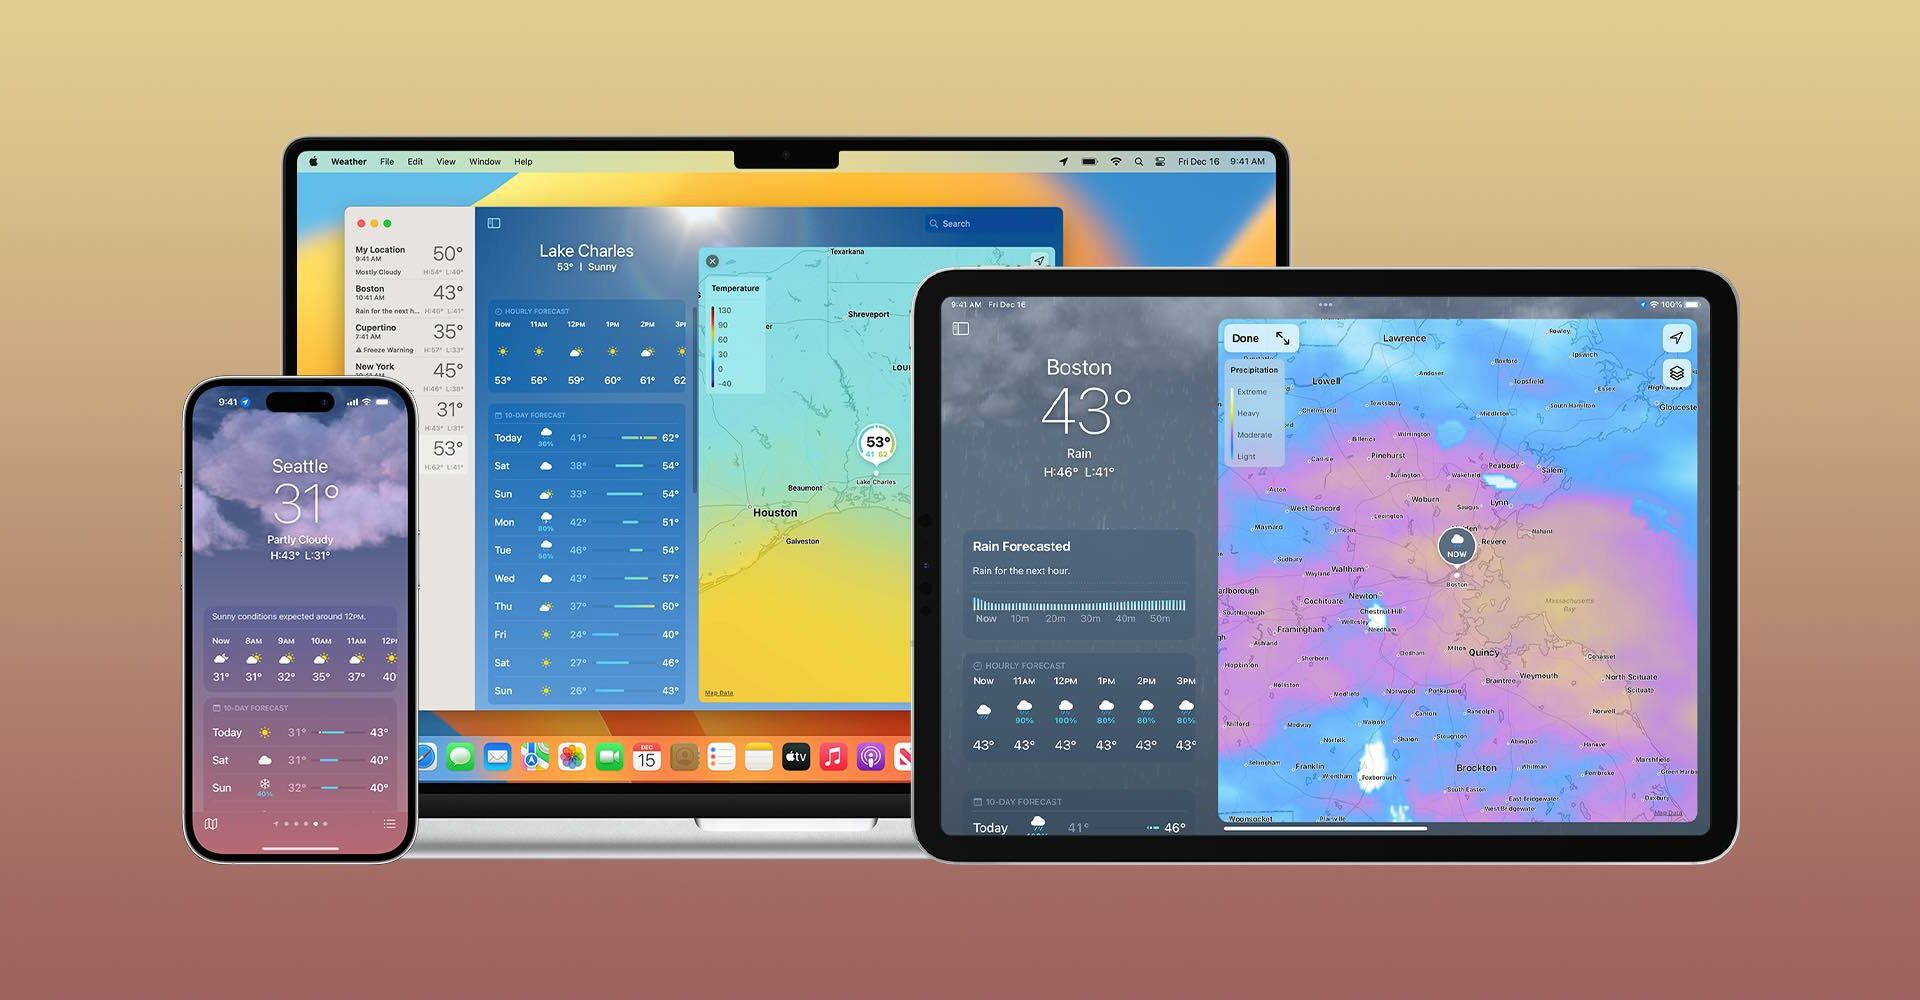 Now that Apple's Weather App Is Working Again, Has the Problem Been Fixed?